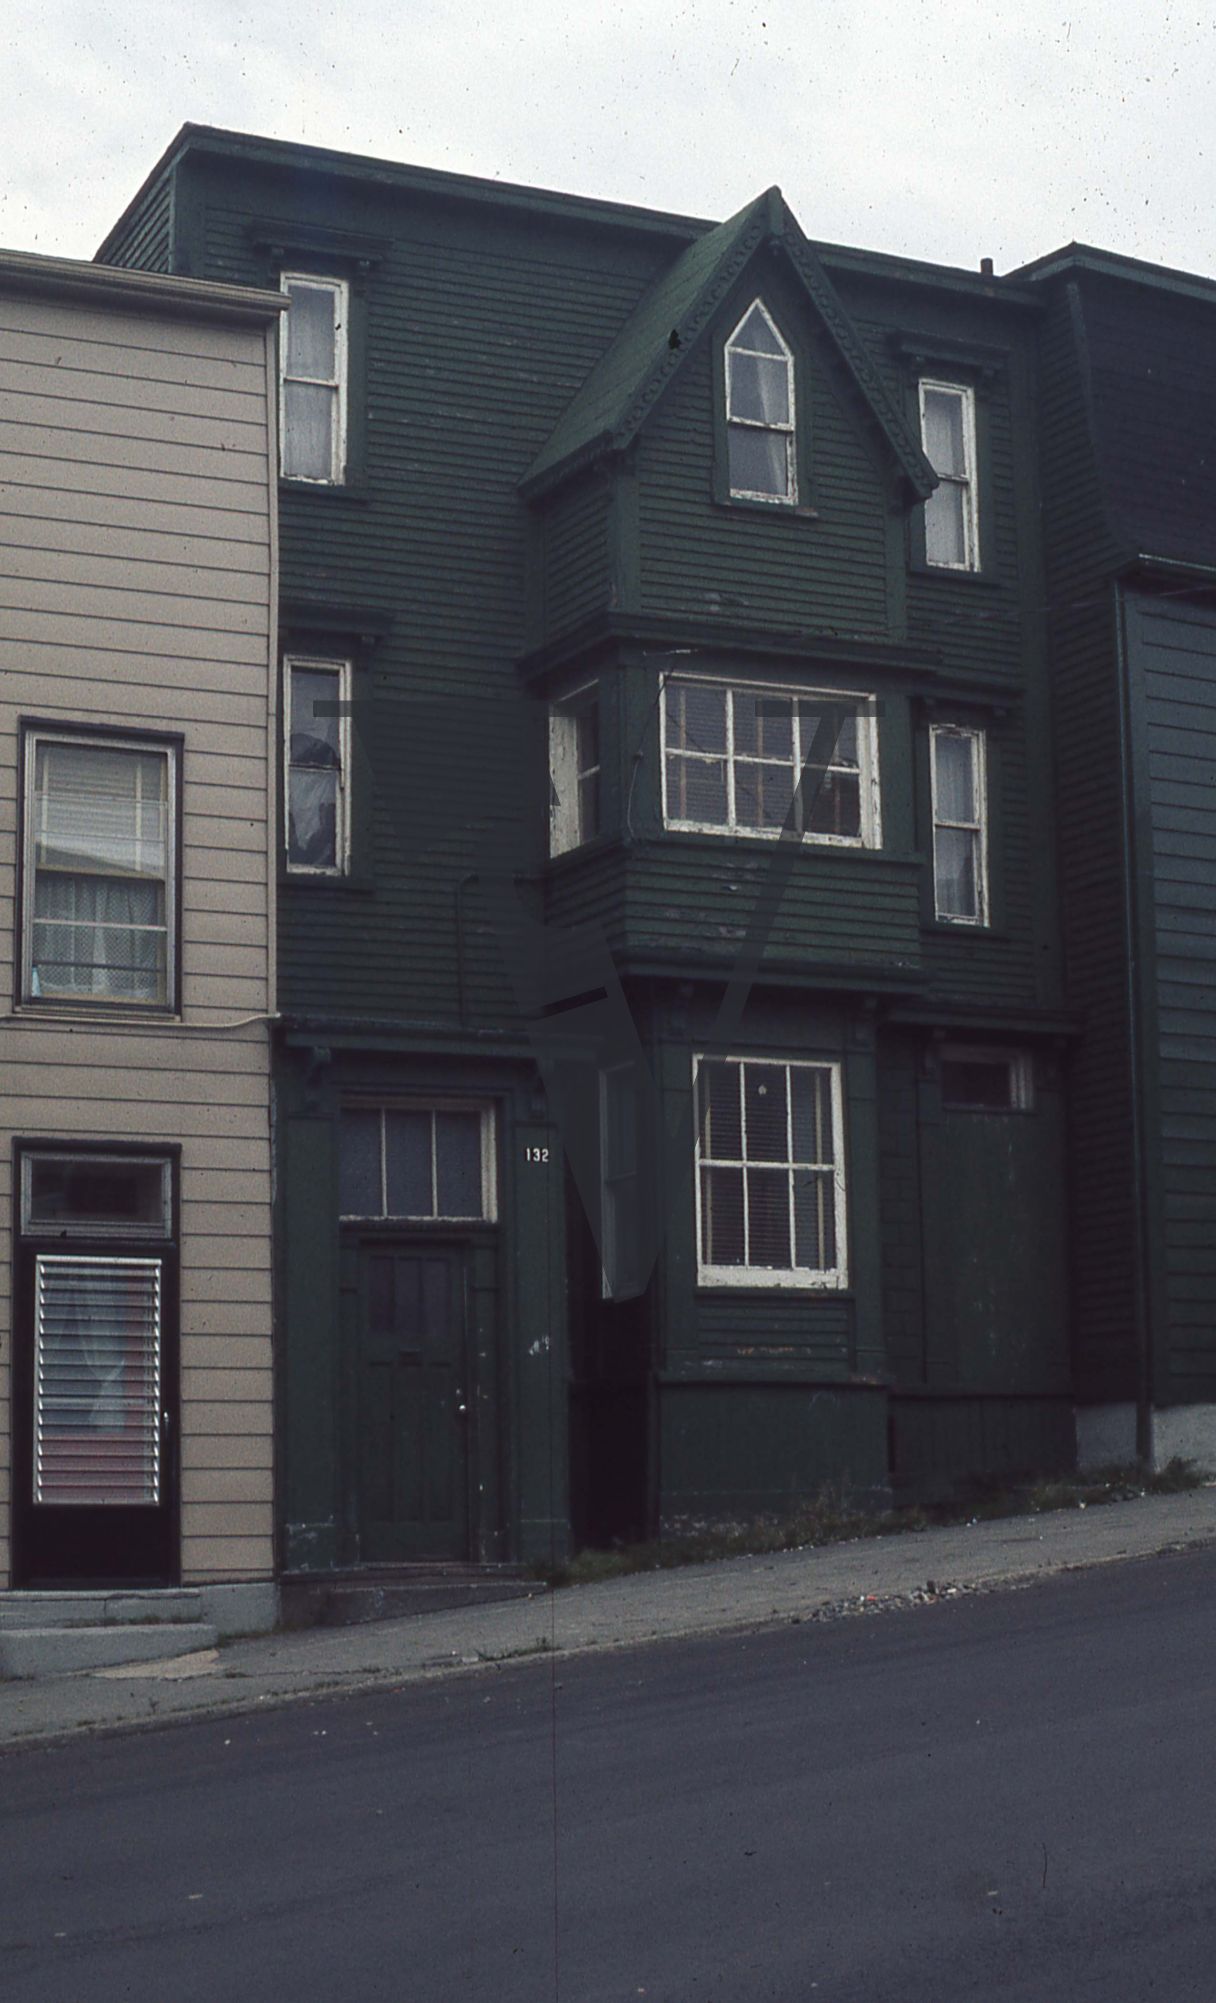 Newfoundland, St. Johns, capital city, black fronted, wooden house.